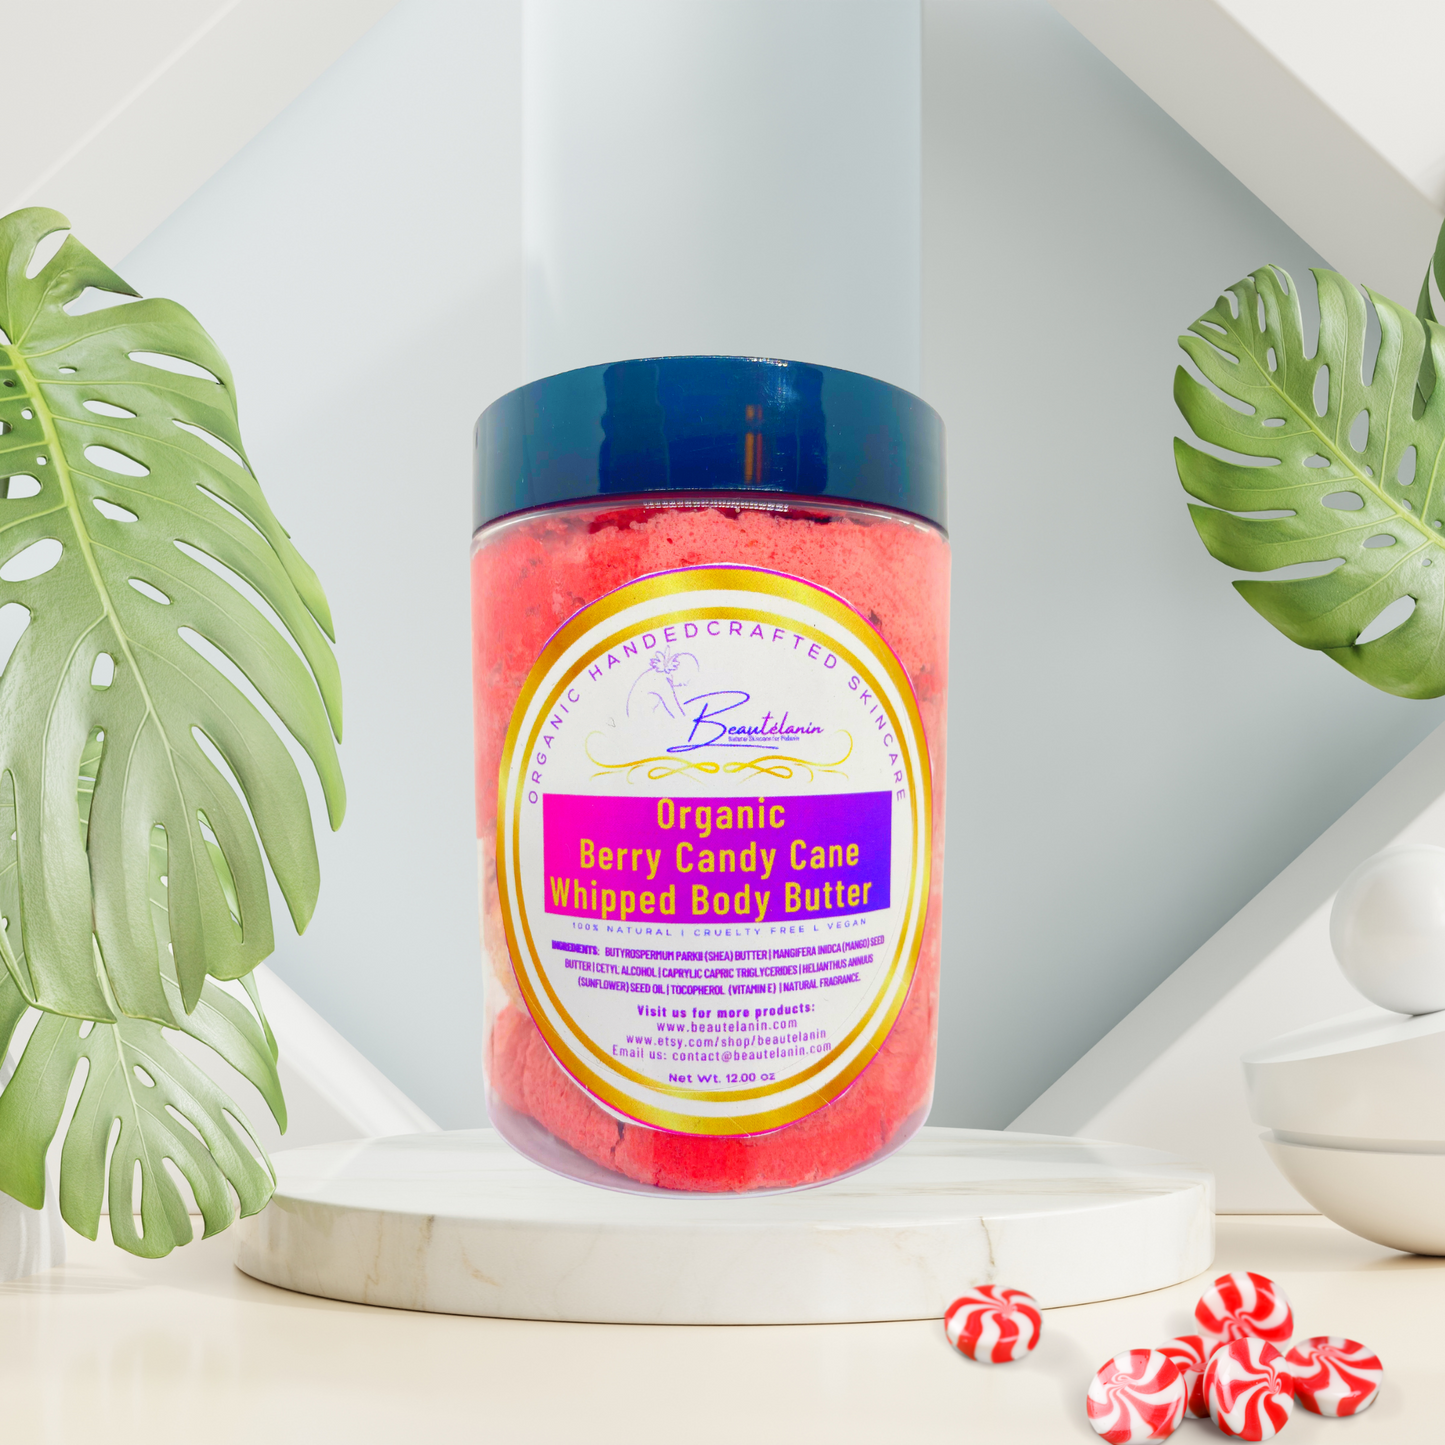 Organic Candy Cane Whipped Body Butter